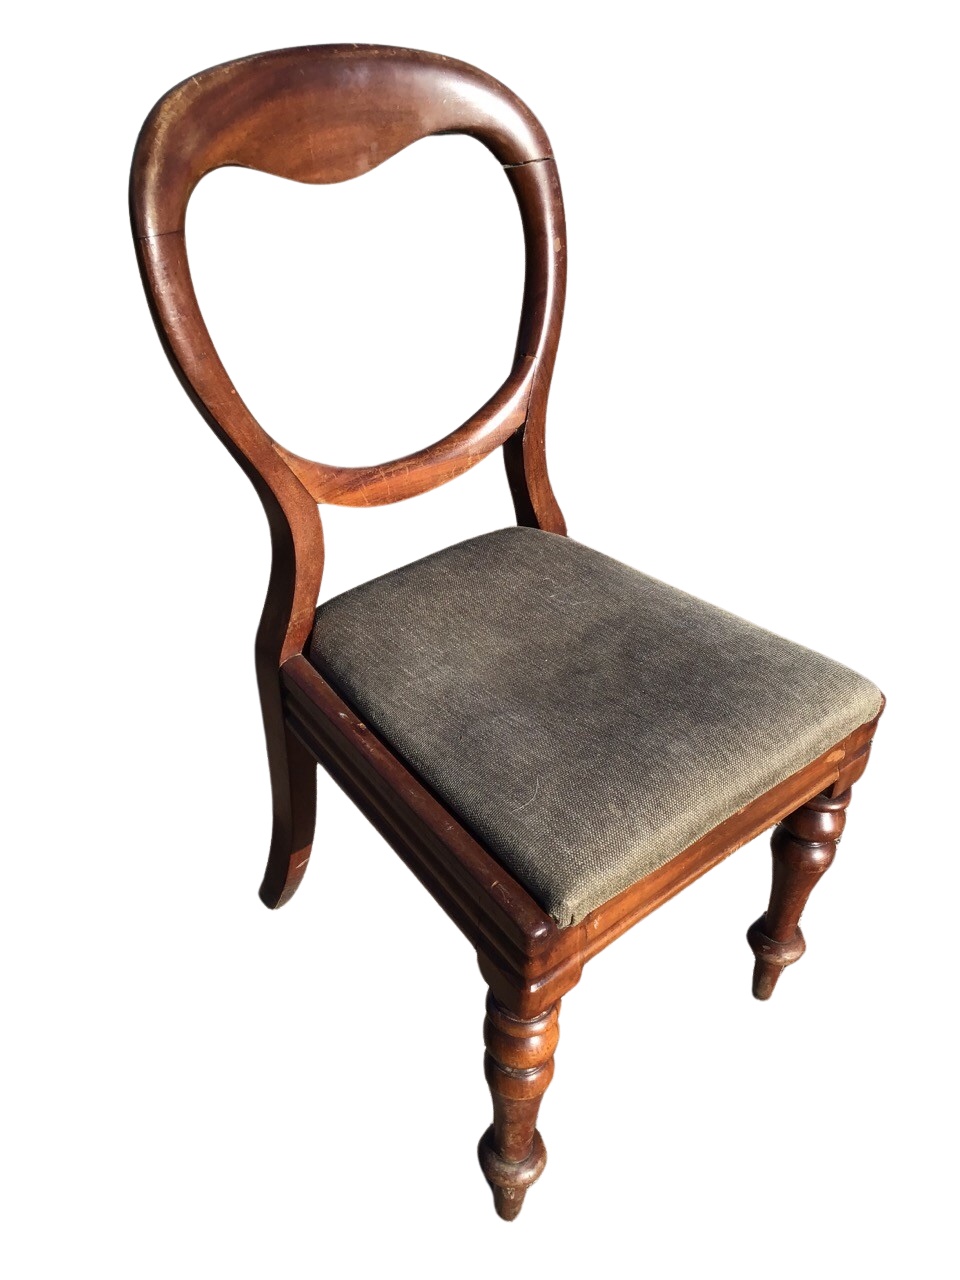 A Victorian mahogany balloon back chair with a drop-in upholstered seat on moulded rails, raised